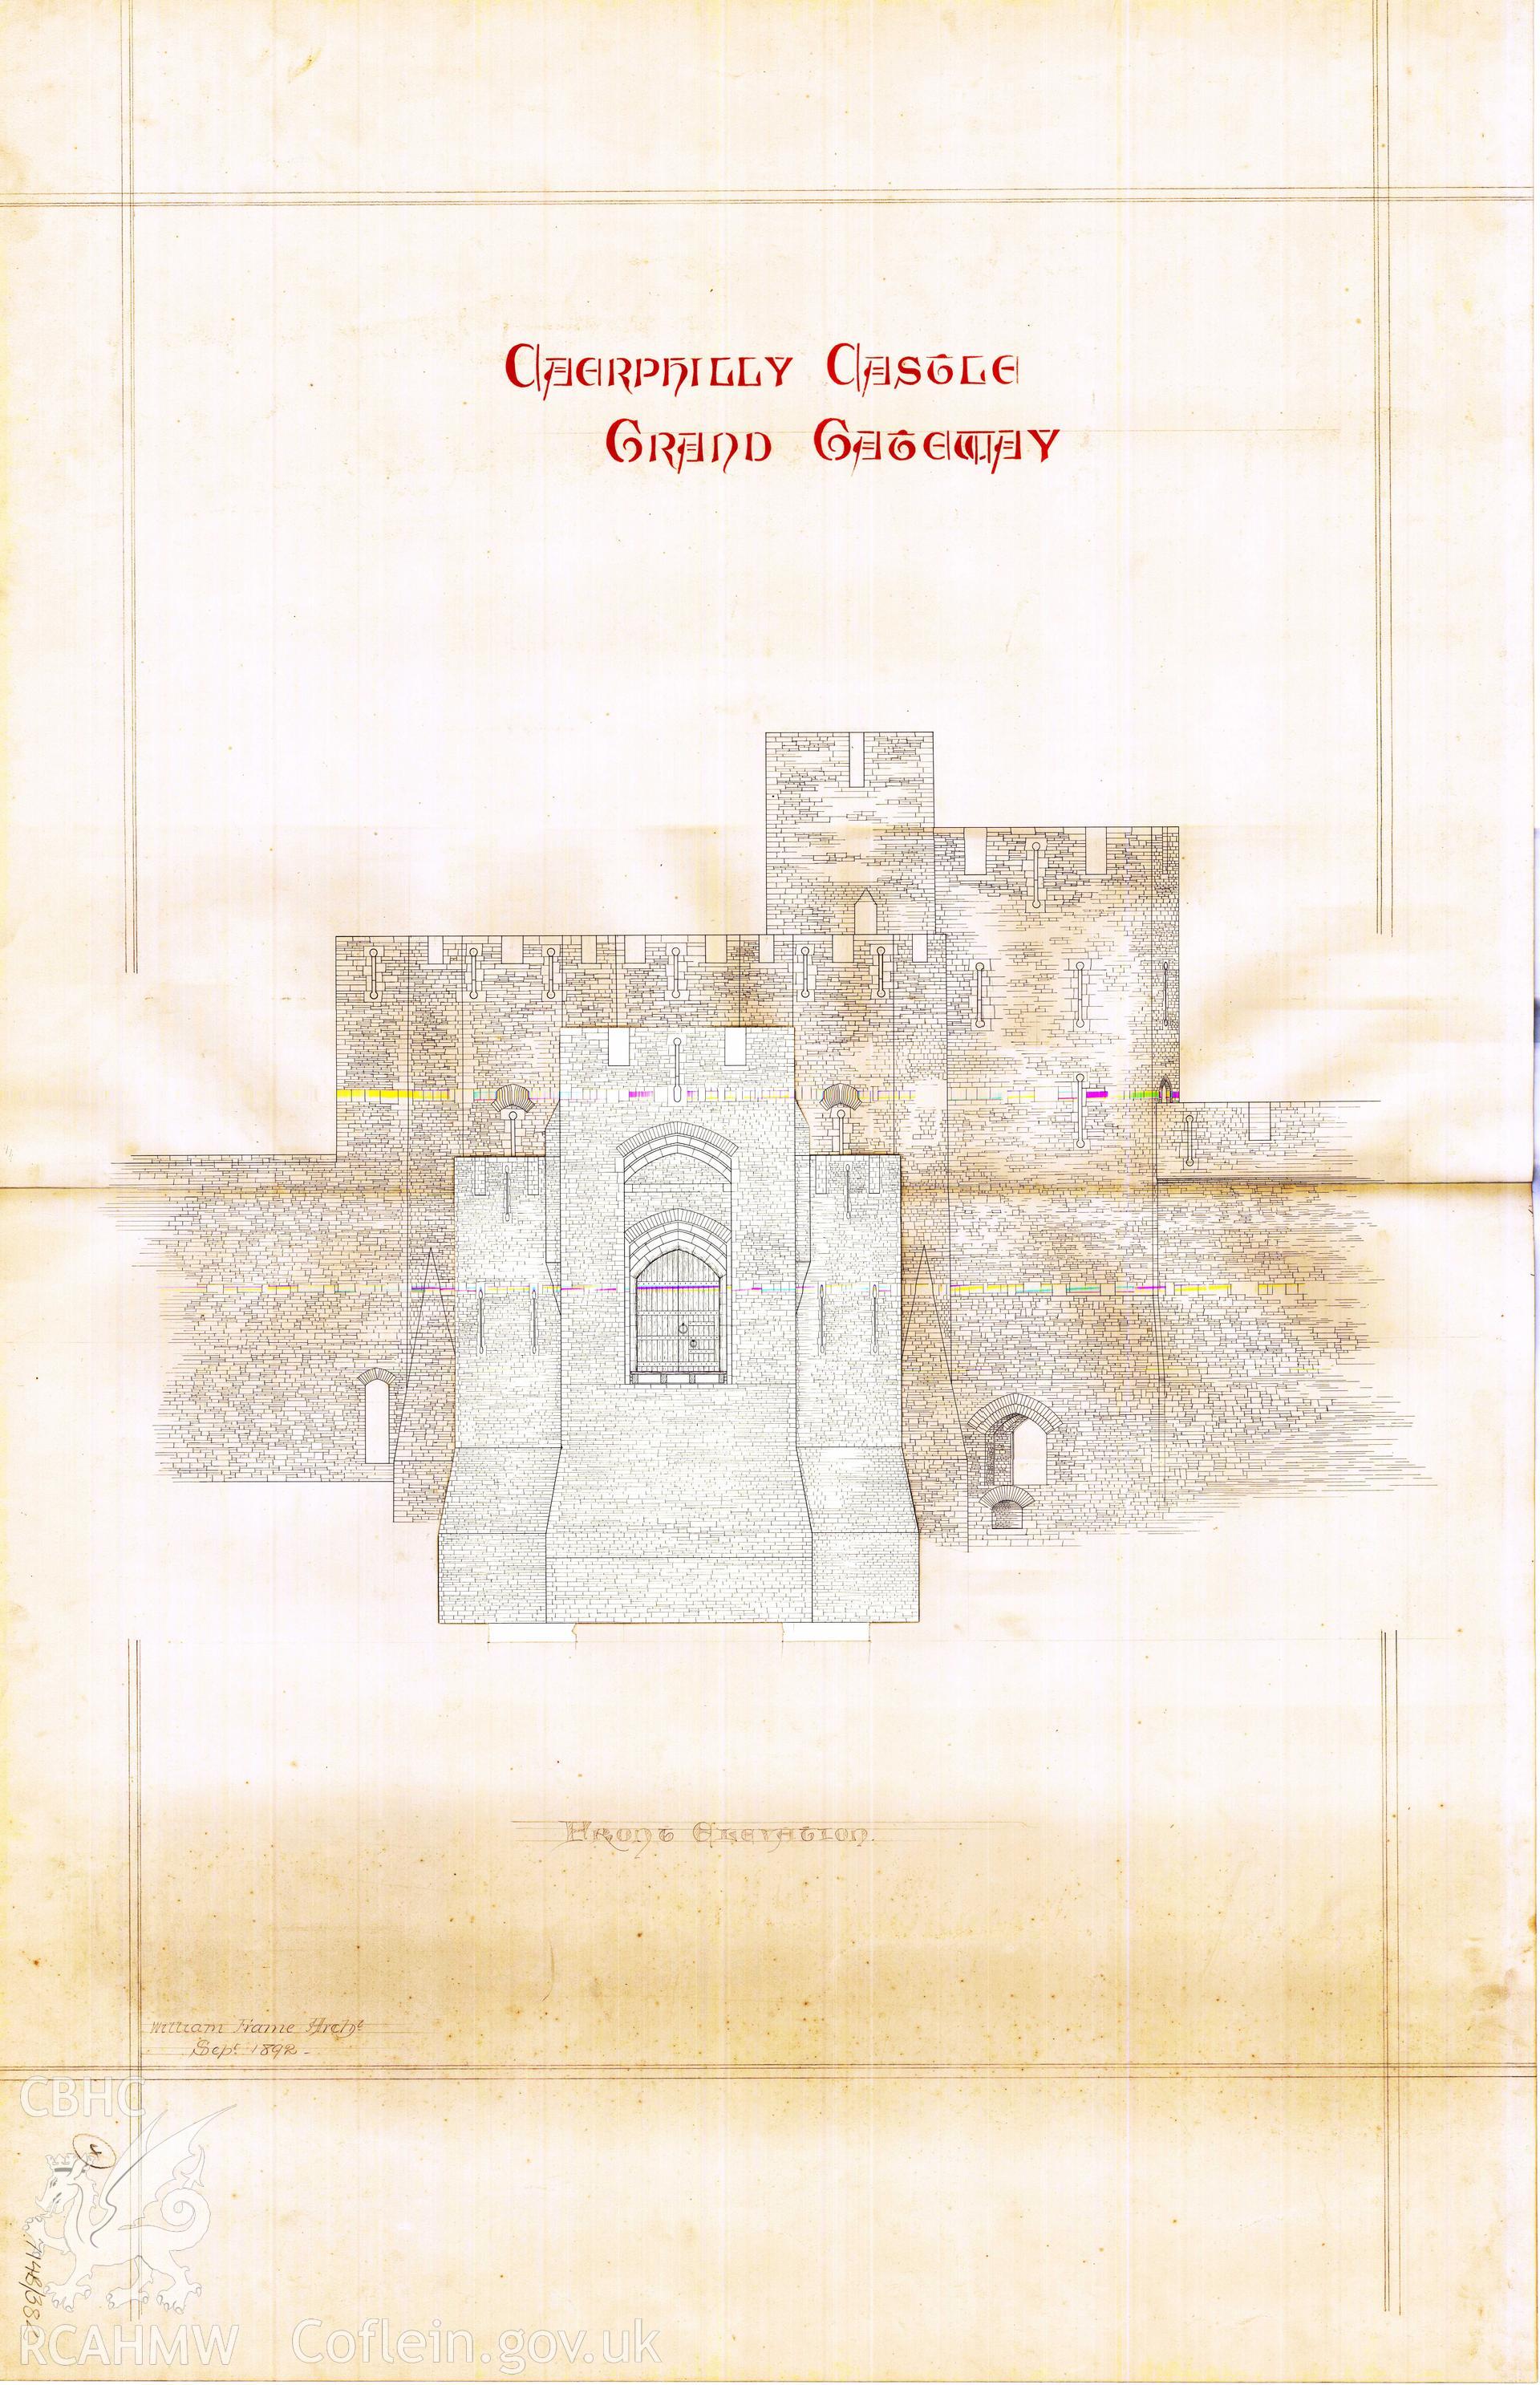 Cadw guardianship monument drawing of Caerphilly Castle. Grand Gateway Elevations Cadw Ref. No:714B/382b. Scale 1:96.